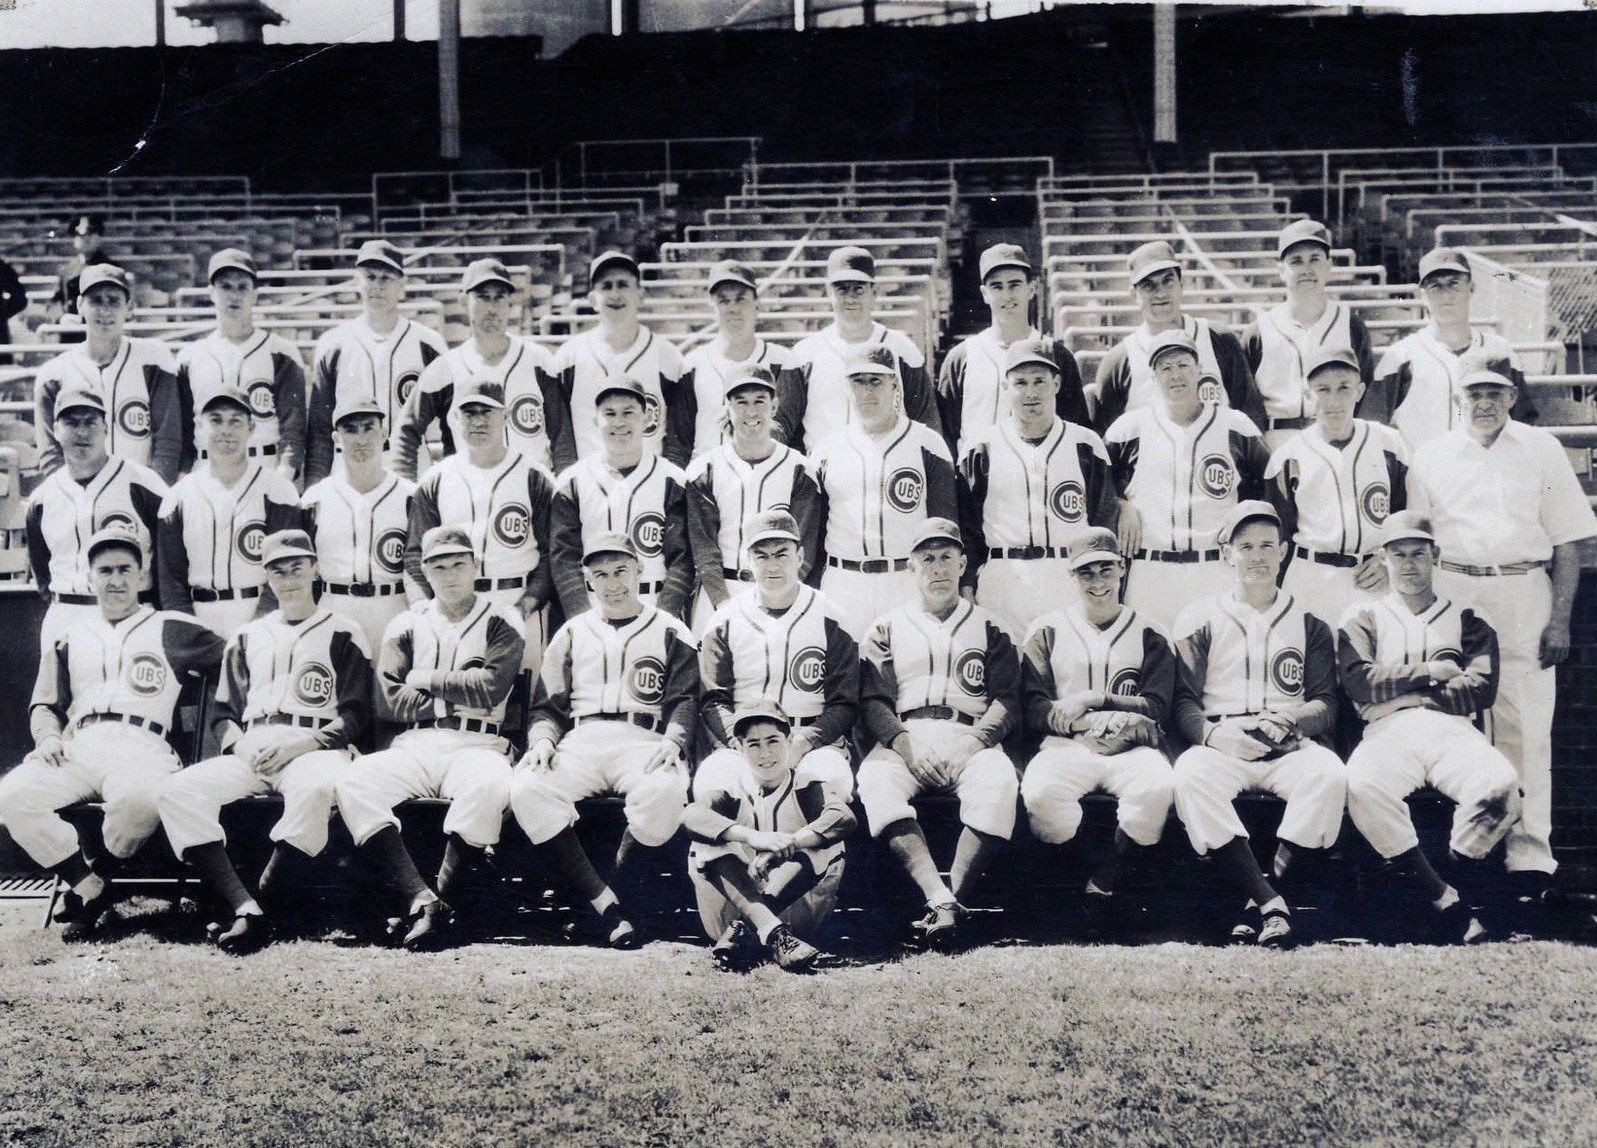 1941 CHICAGO CUBS 8X10 TEAM PHOTO BASEBALL MLB PICTURE - $4.94